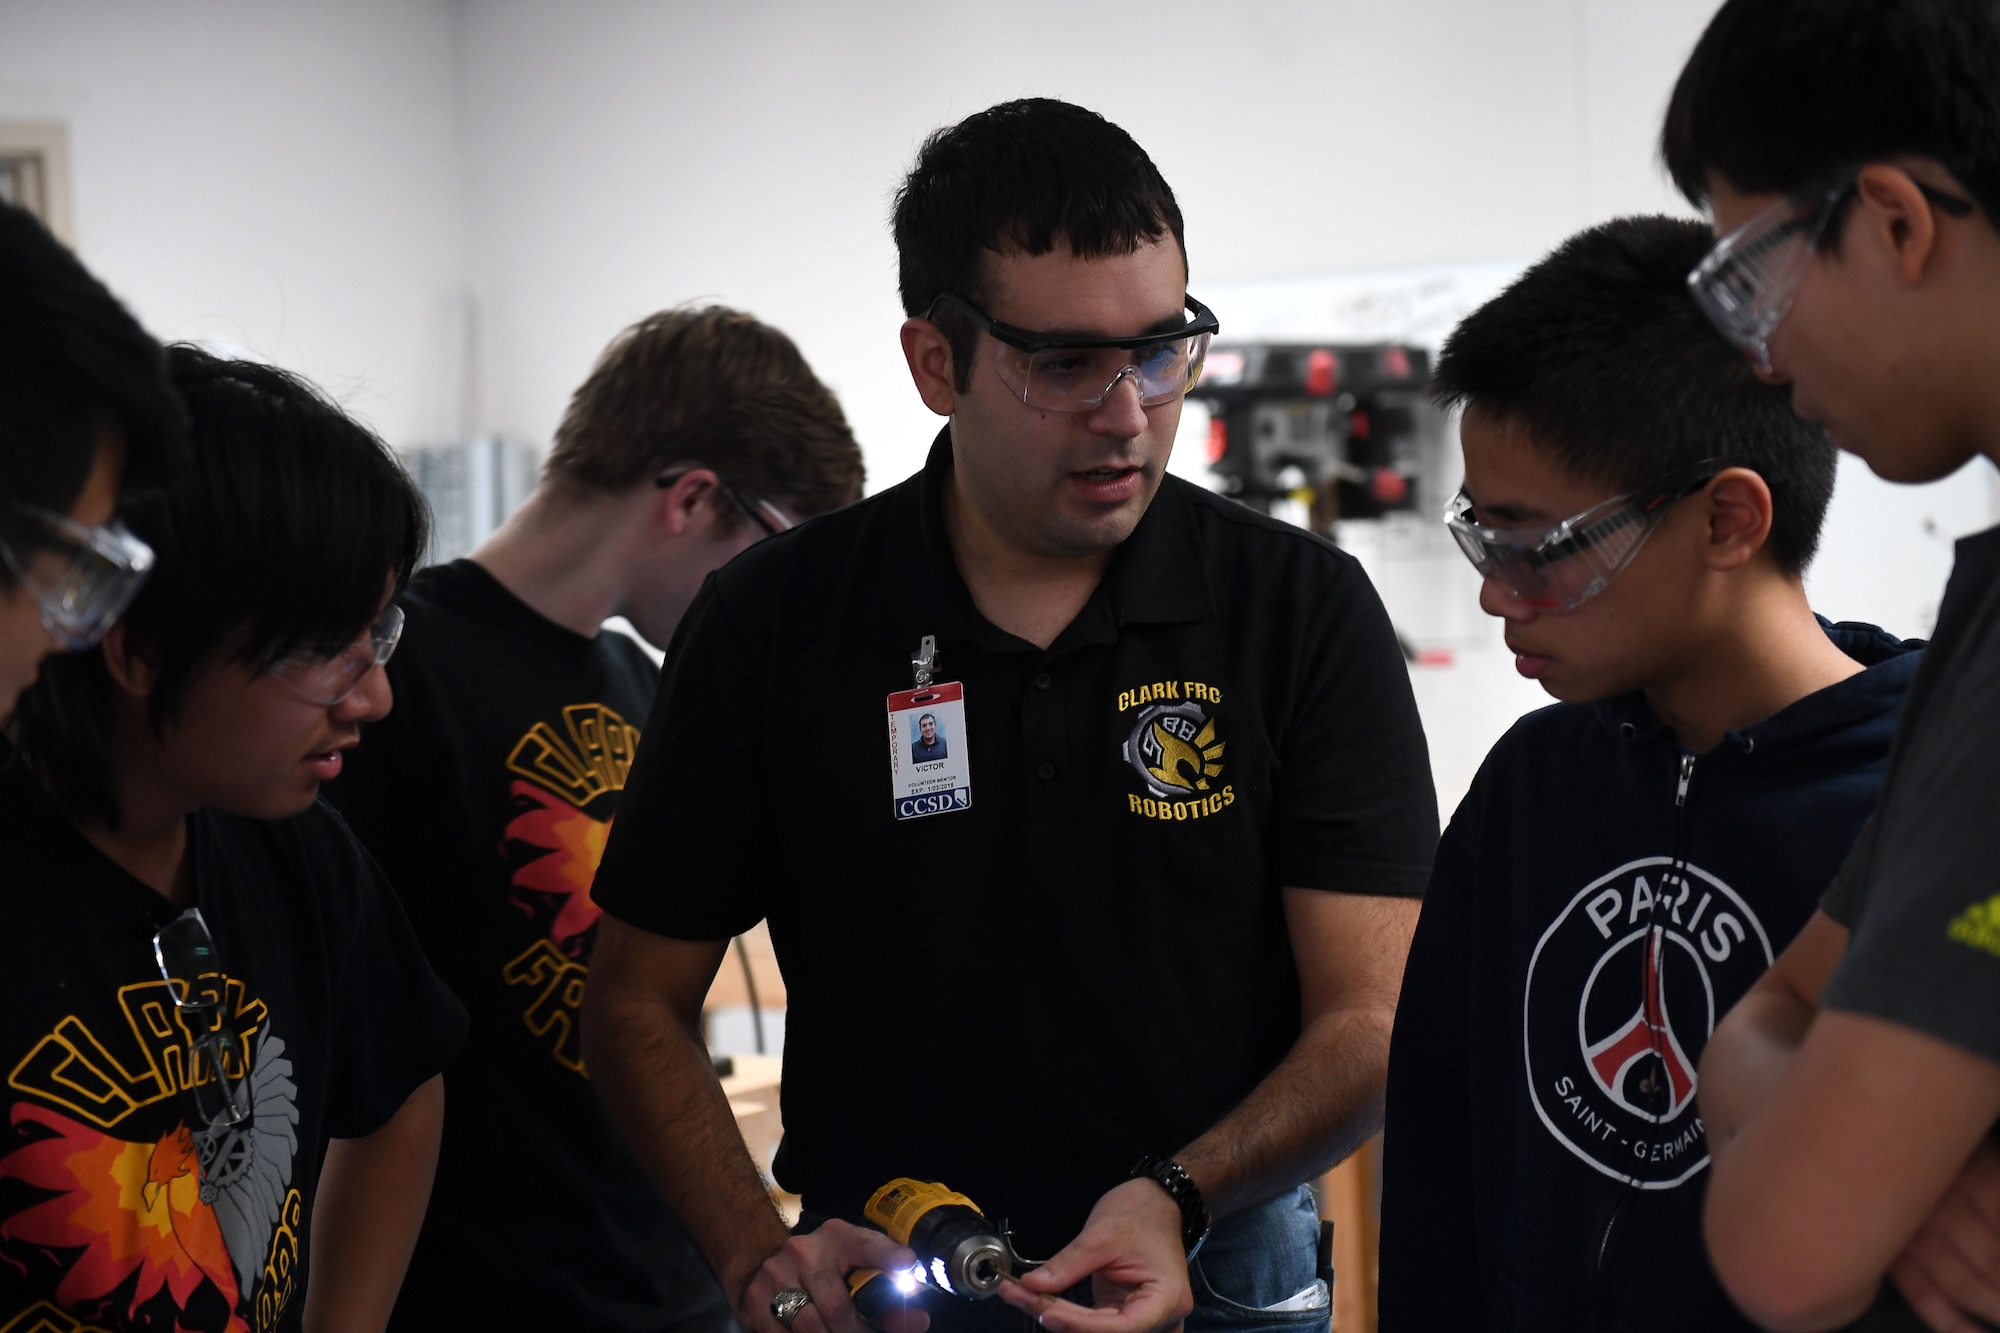 Capt. Victor, 17th Attack Squadron MQ-9 Reaper pilot, shows a high school robotics team how to work with an electric drill, in Las Vegas, Sept. 7, 2017.